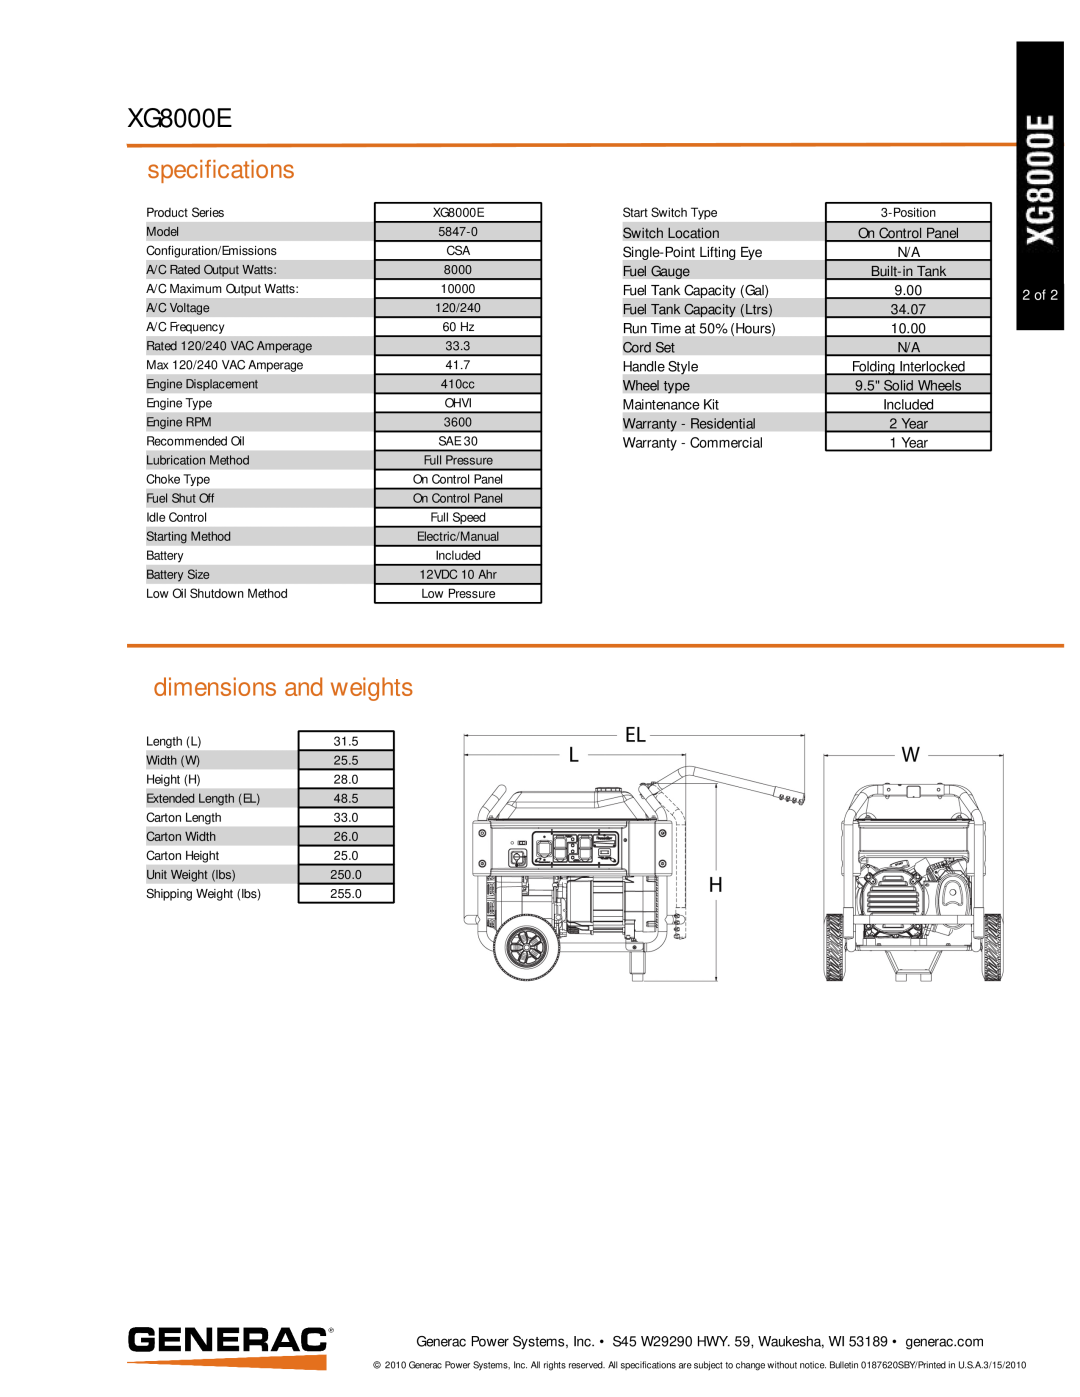 Generac 5847-0 manual XG8000E, specifications, dimensions and weights, 2 of 